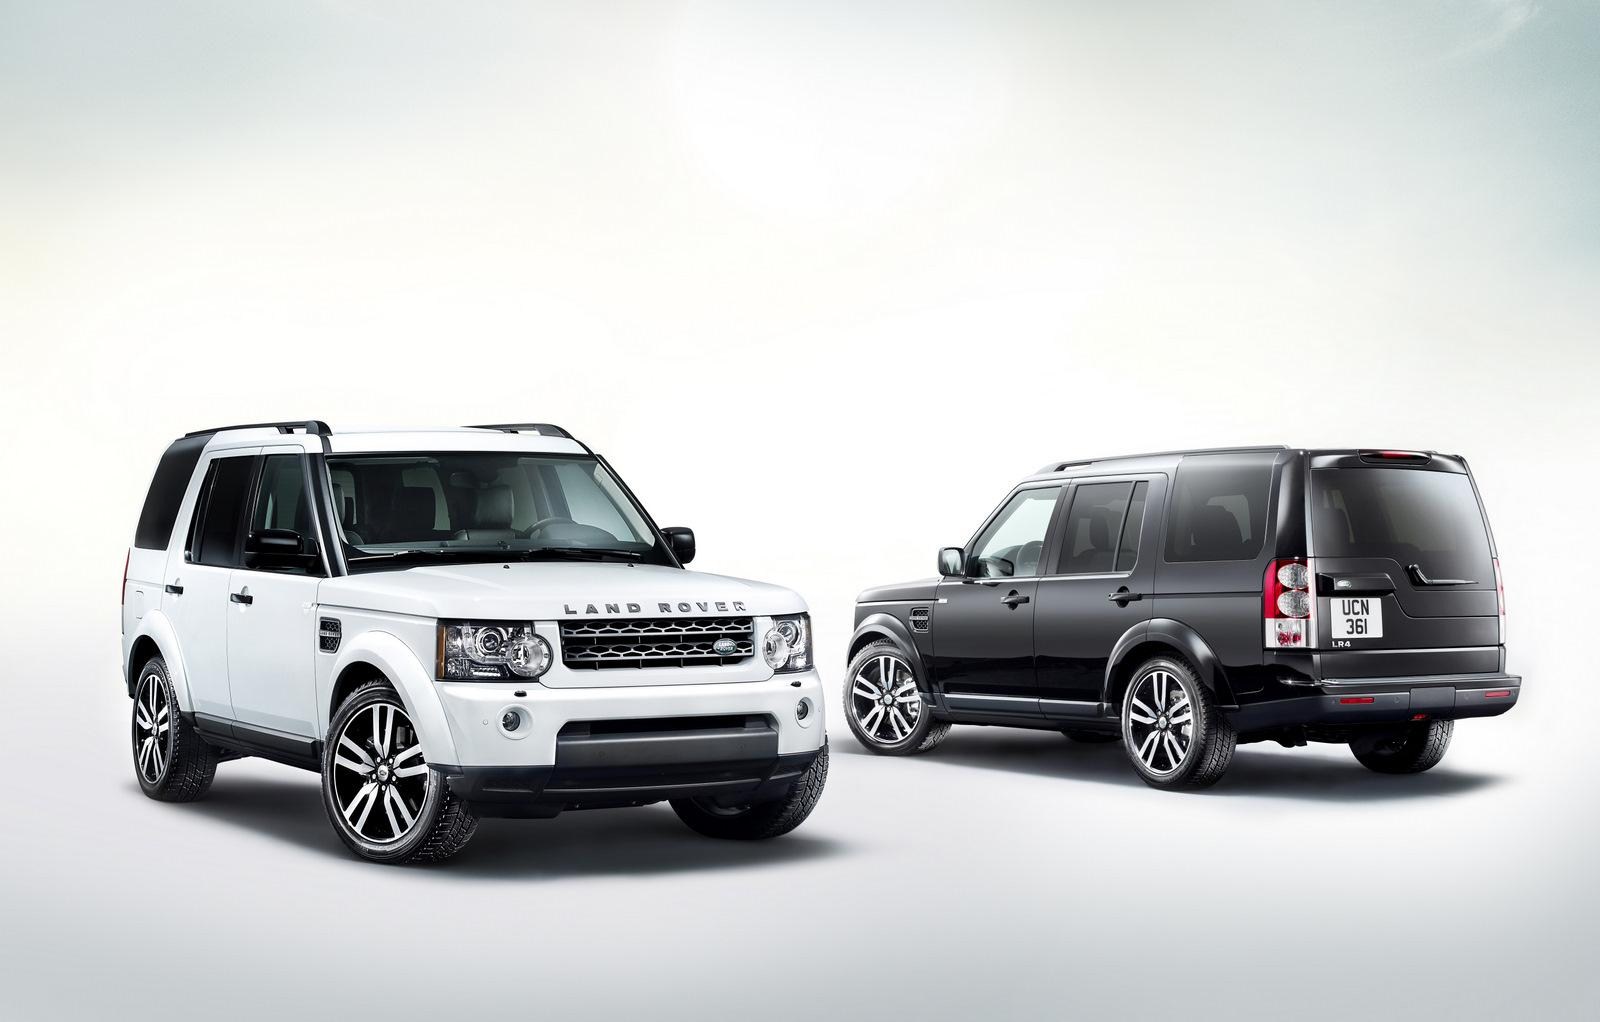 Land Rover Discovery 4 Spy Photos Wallpaper, Specification, Prices Review